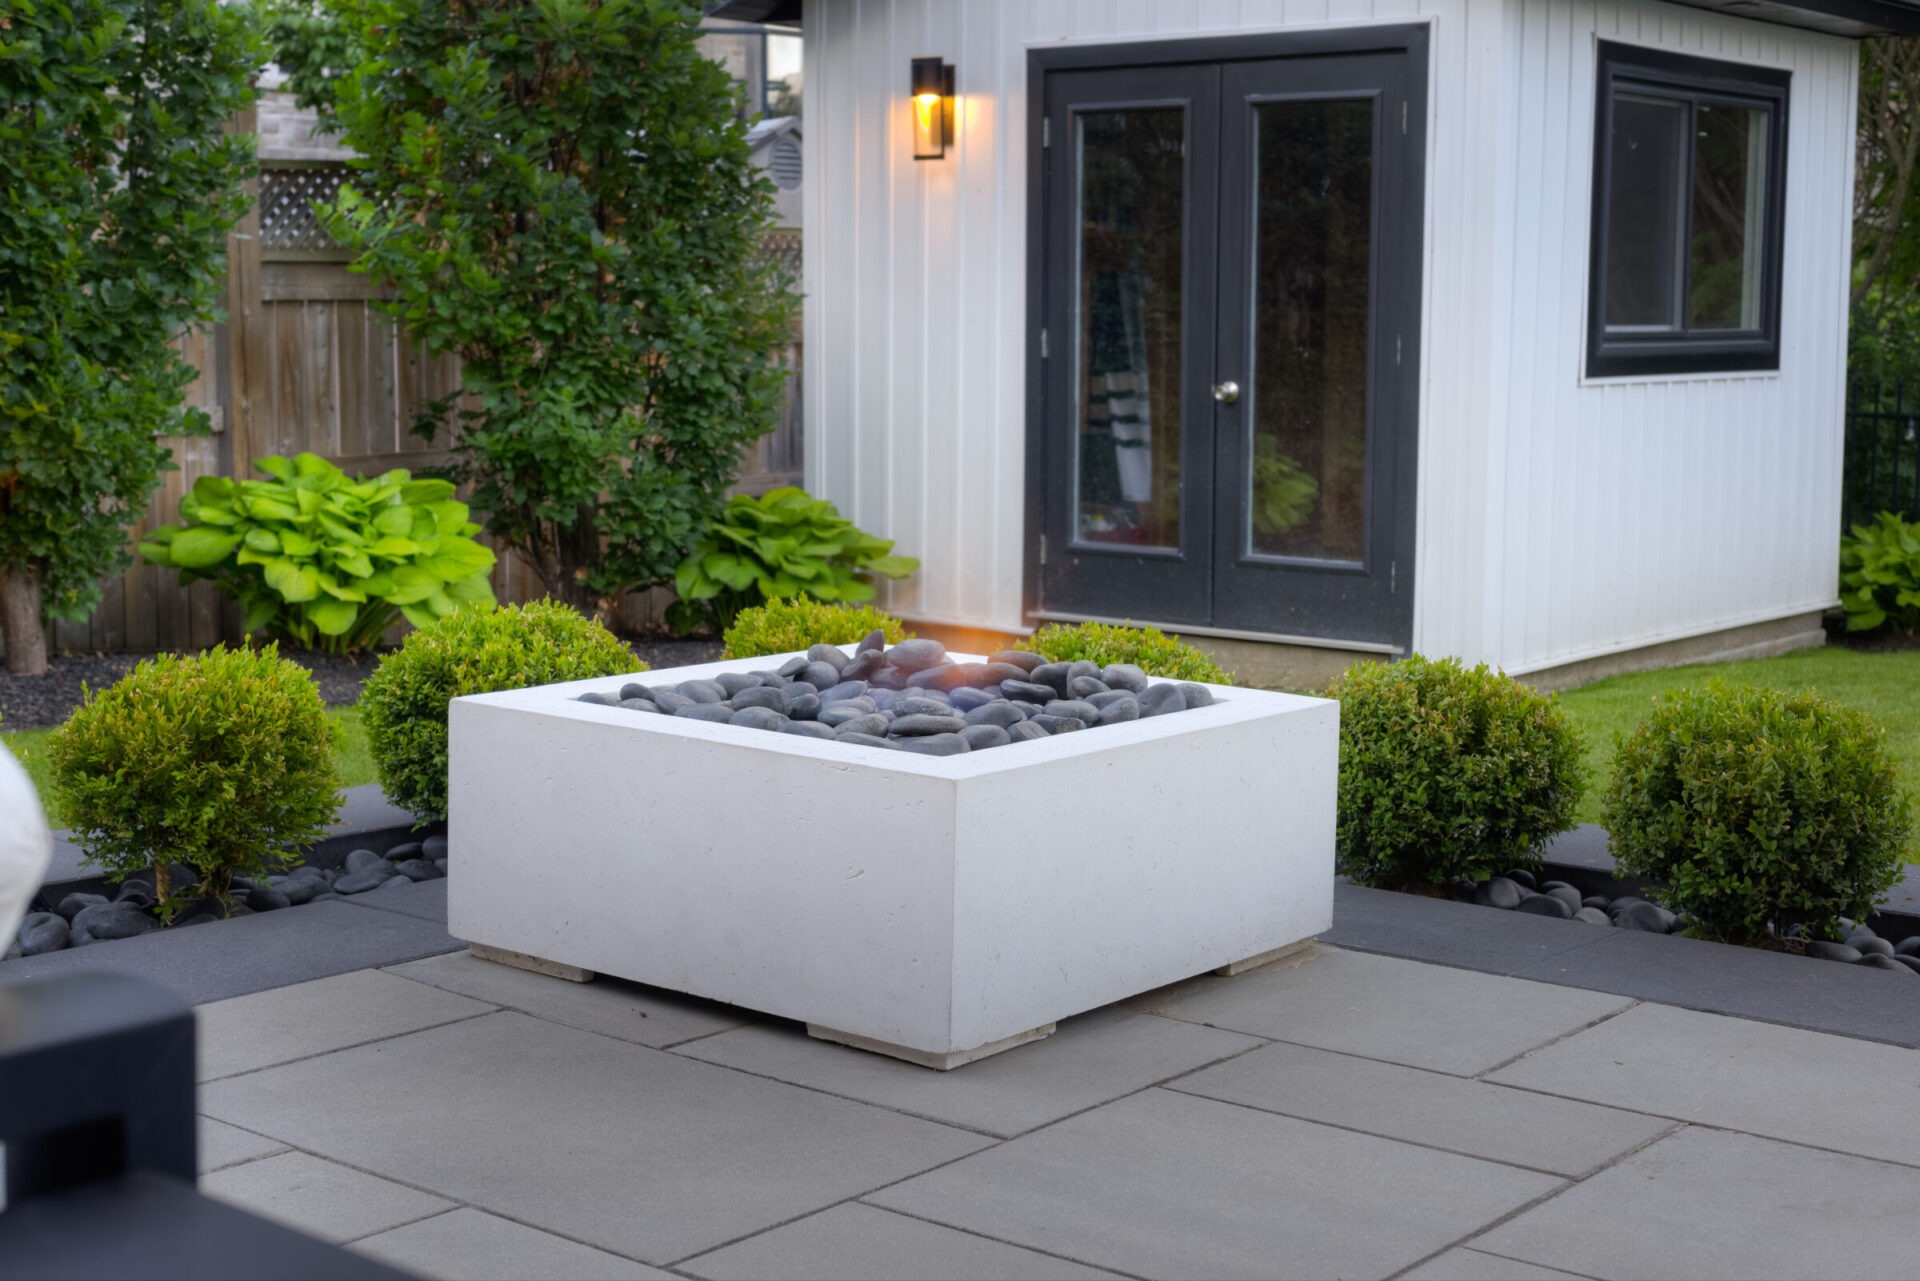 A modern backyard with a square concrete fire pit filled with stones, surrounded by manicured bushes, against a backdrop of a white house.